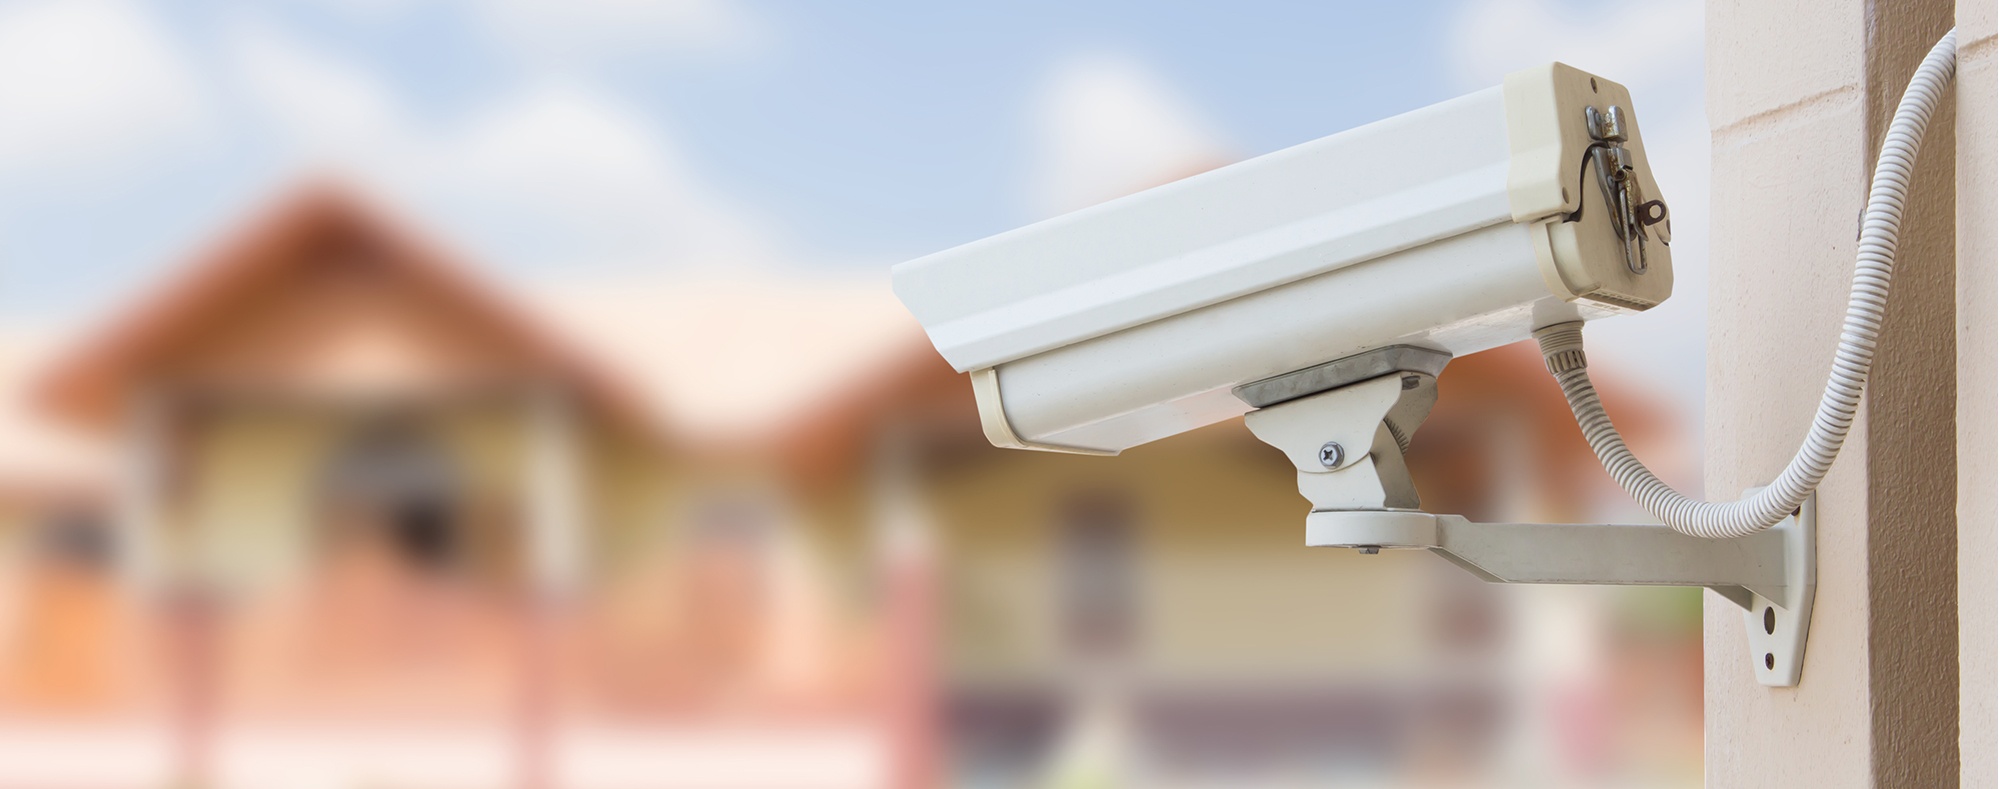 Blog by Simon Security Systems